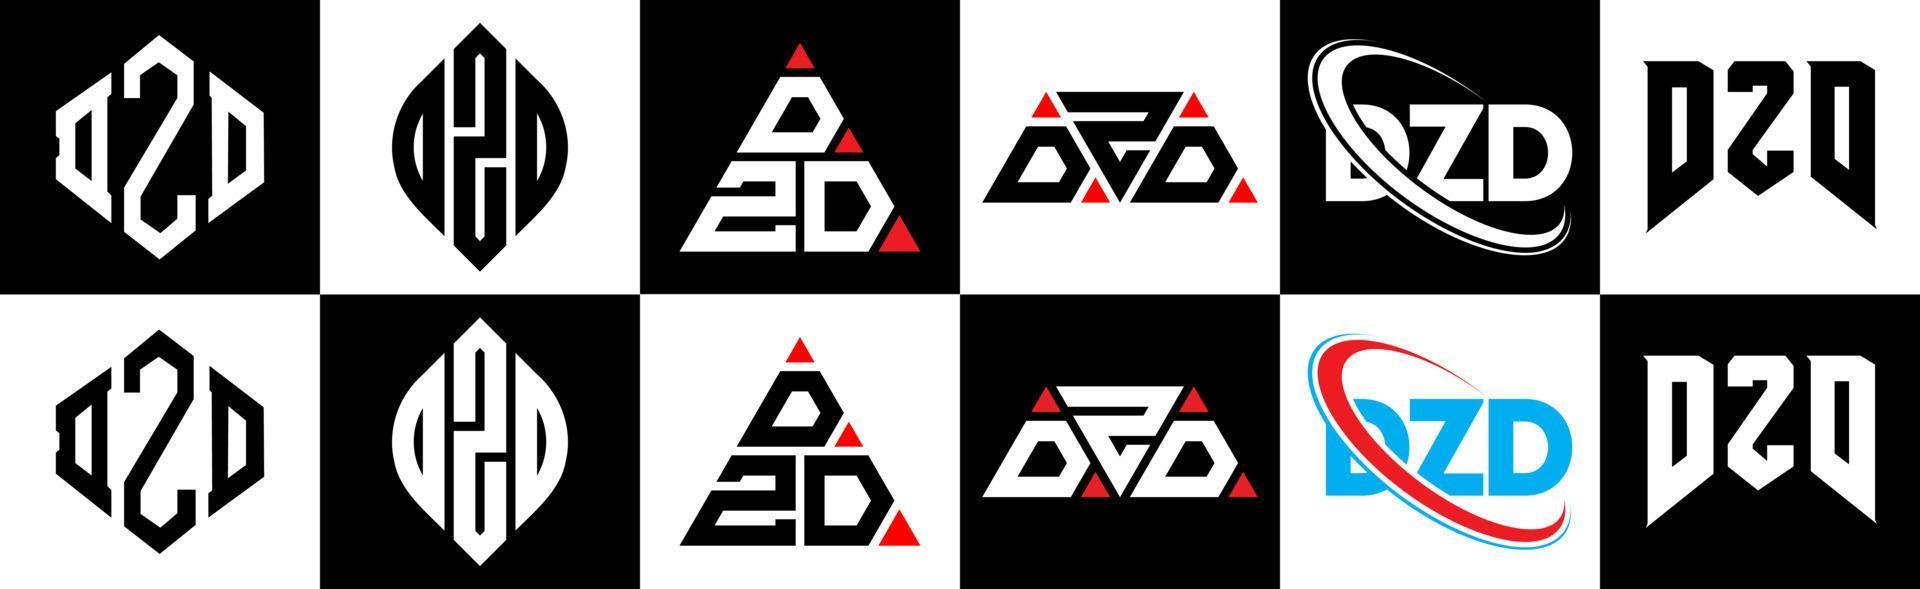 DZD letter logo design in six style. DZD polygon, circle, triangle, hexagon, flat and simple style with black and white color variation letter logo set in one artboard. DZD minimalist and classic logo vector